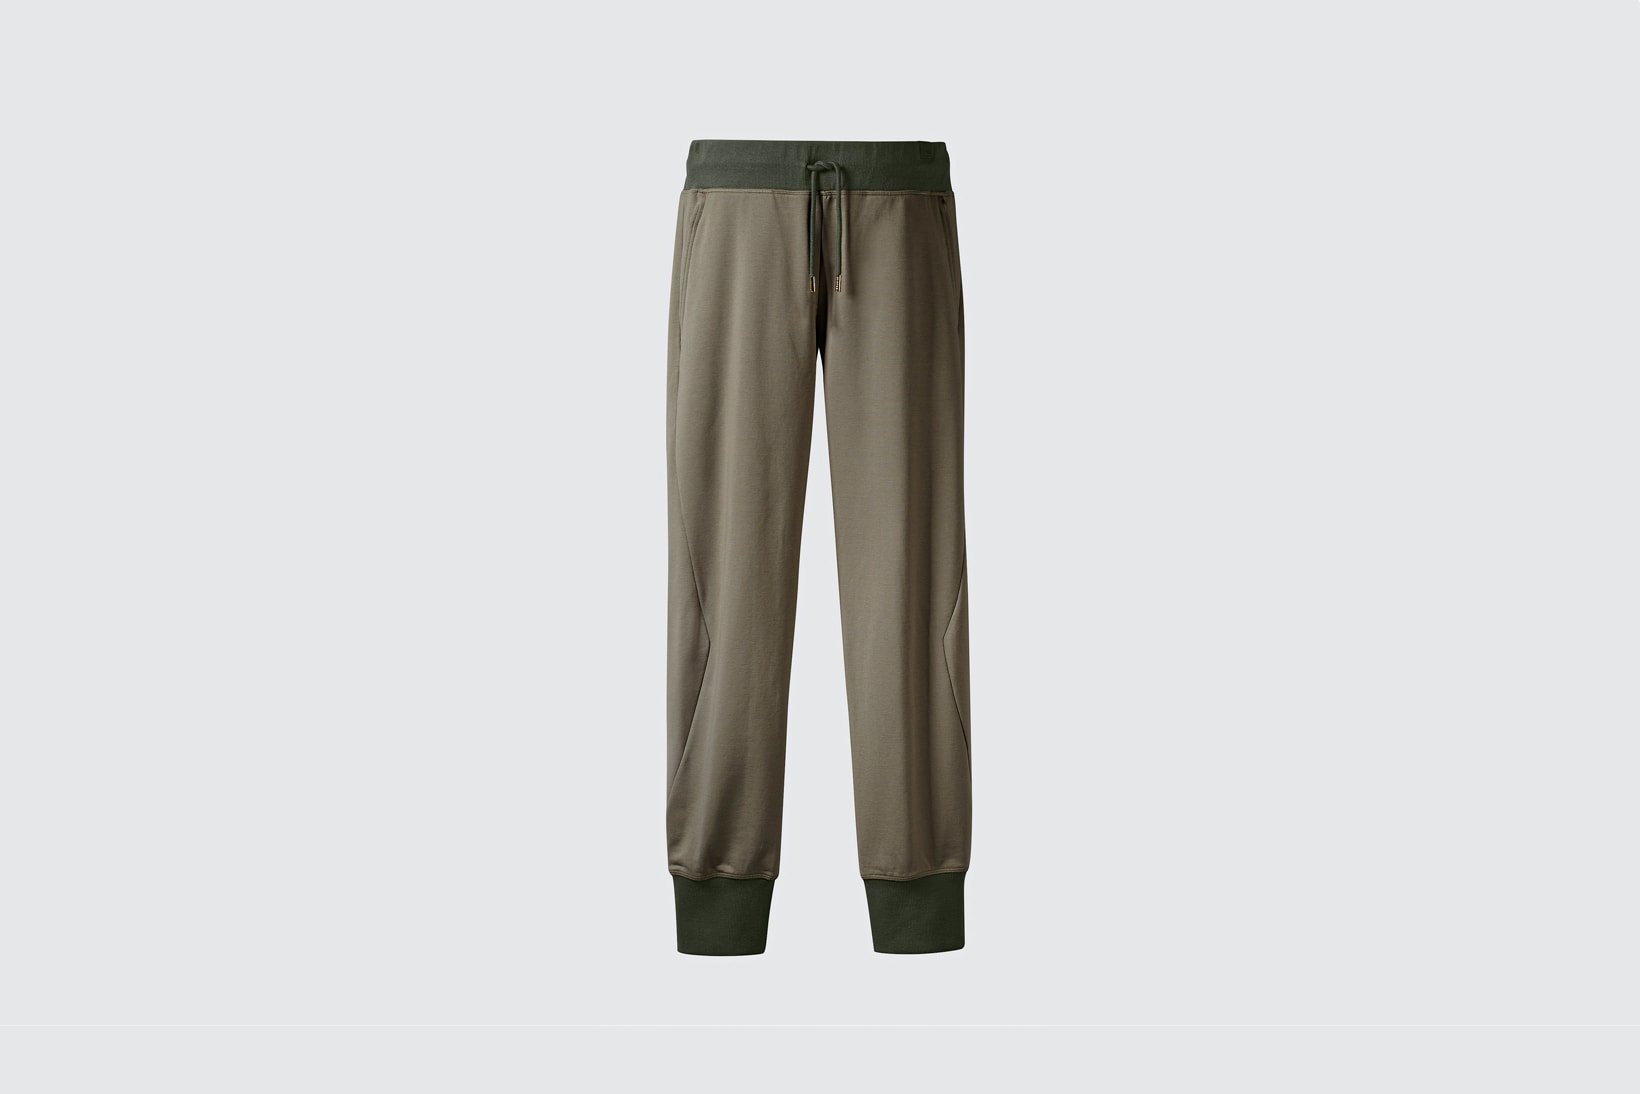 adidas Originals x Oyster Holdings Spring/Summer 2018 Capsule Collection Sweatpant Green